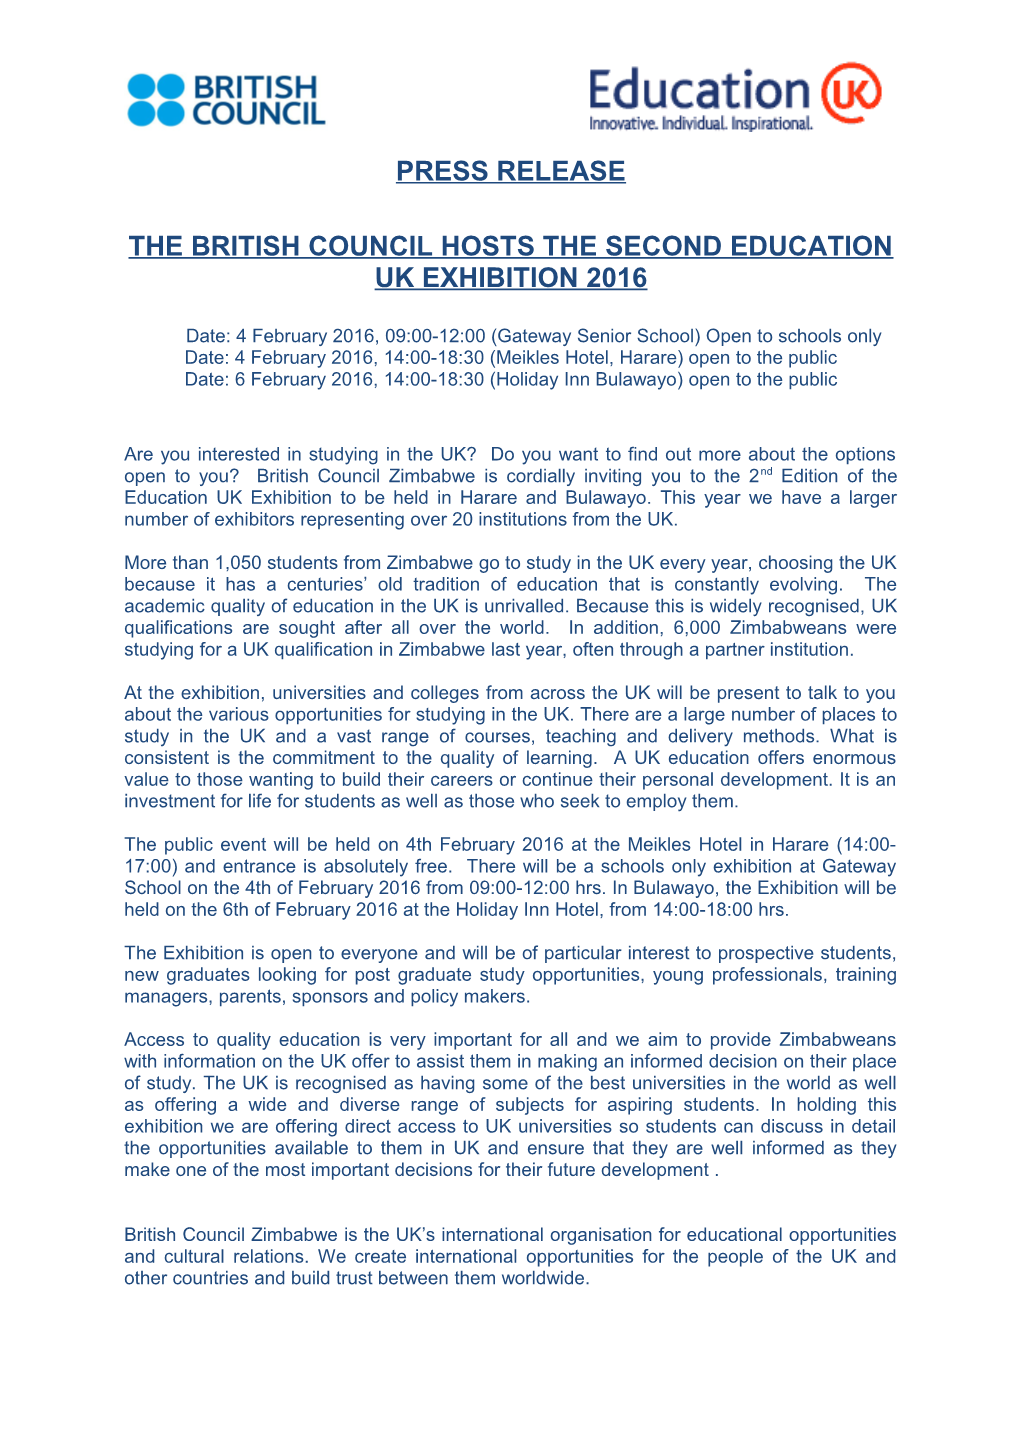 The British Council Hosts the Second Education Uk Exhibition 2016